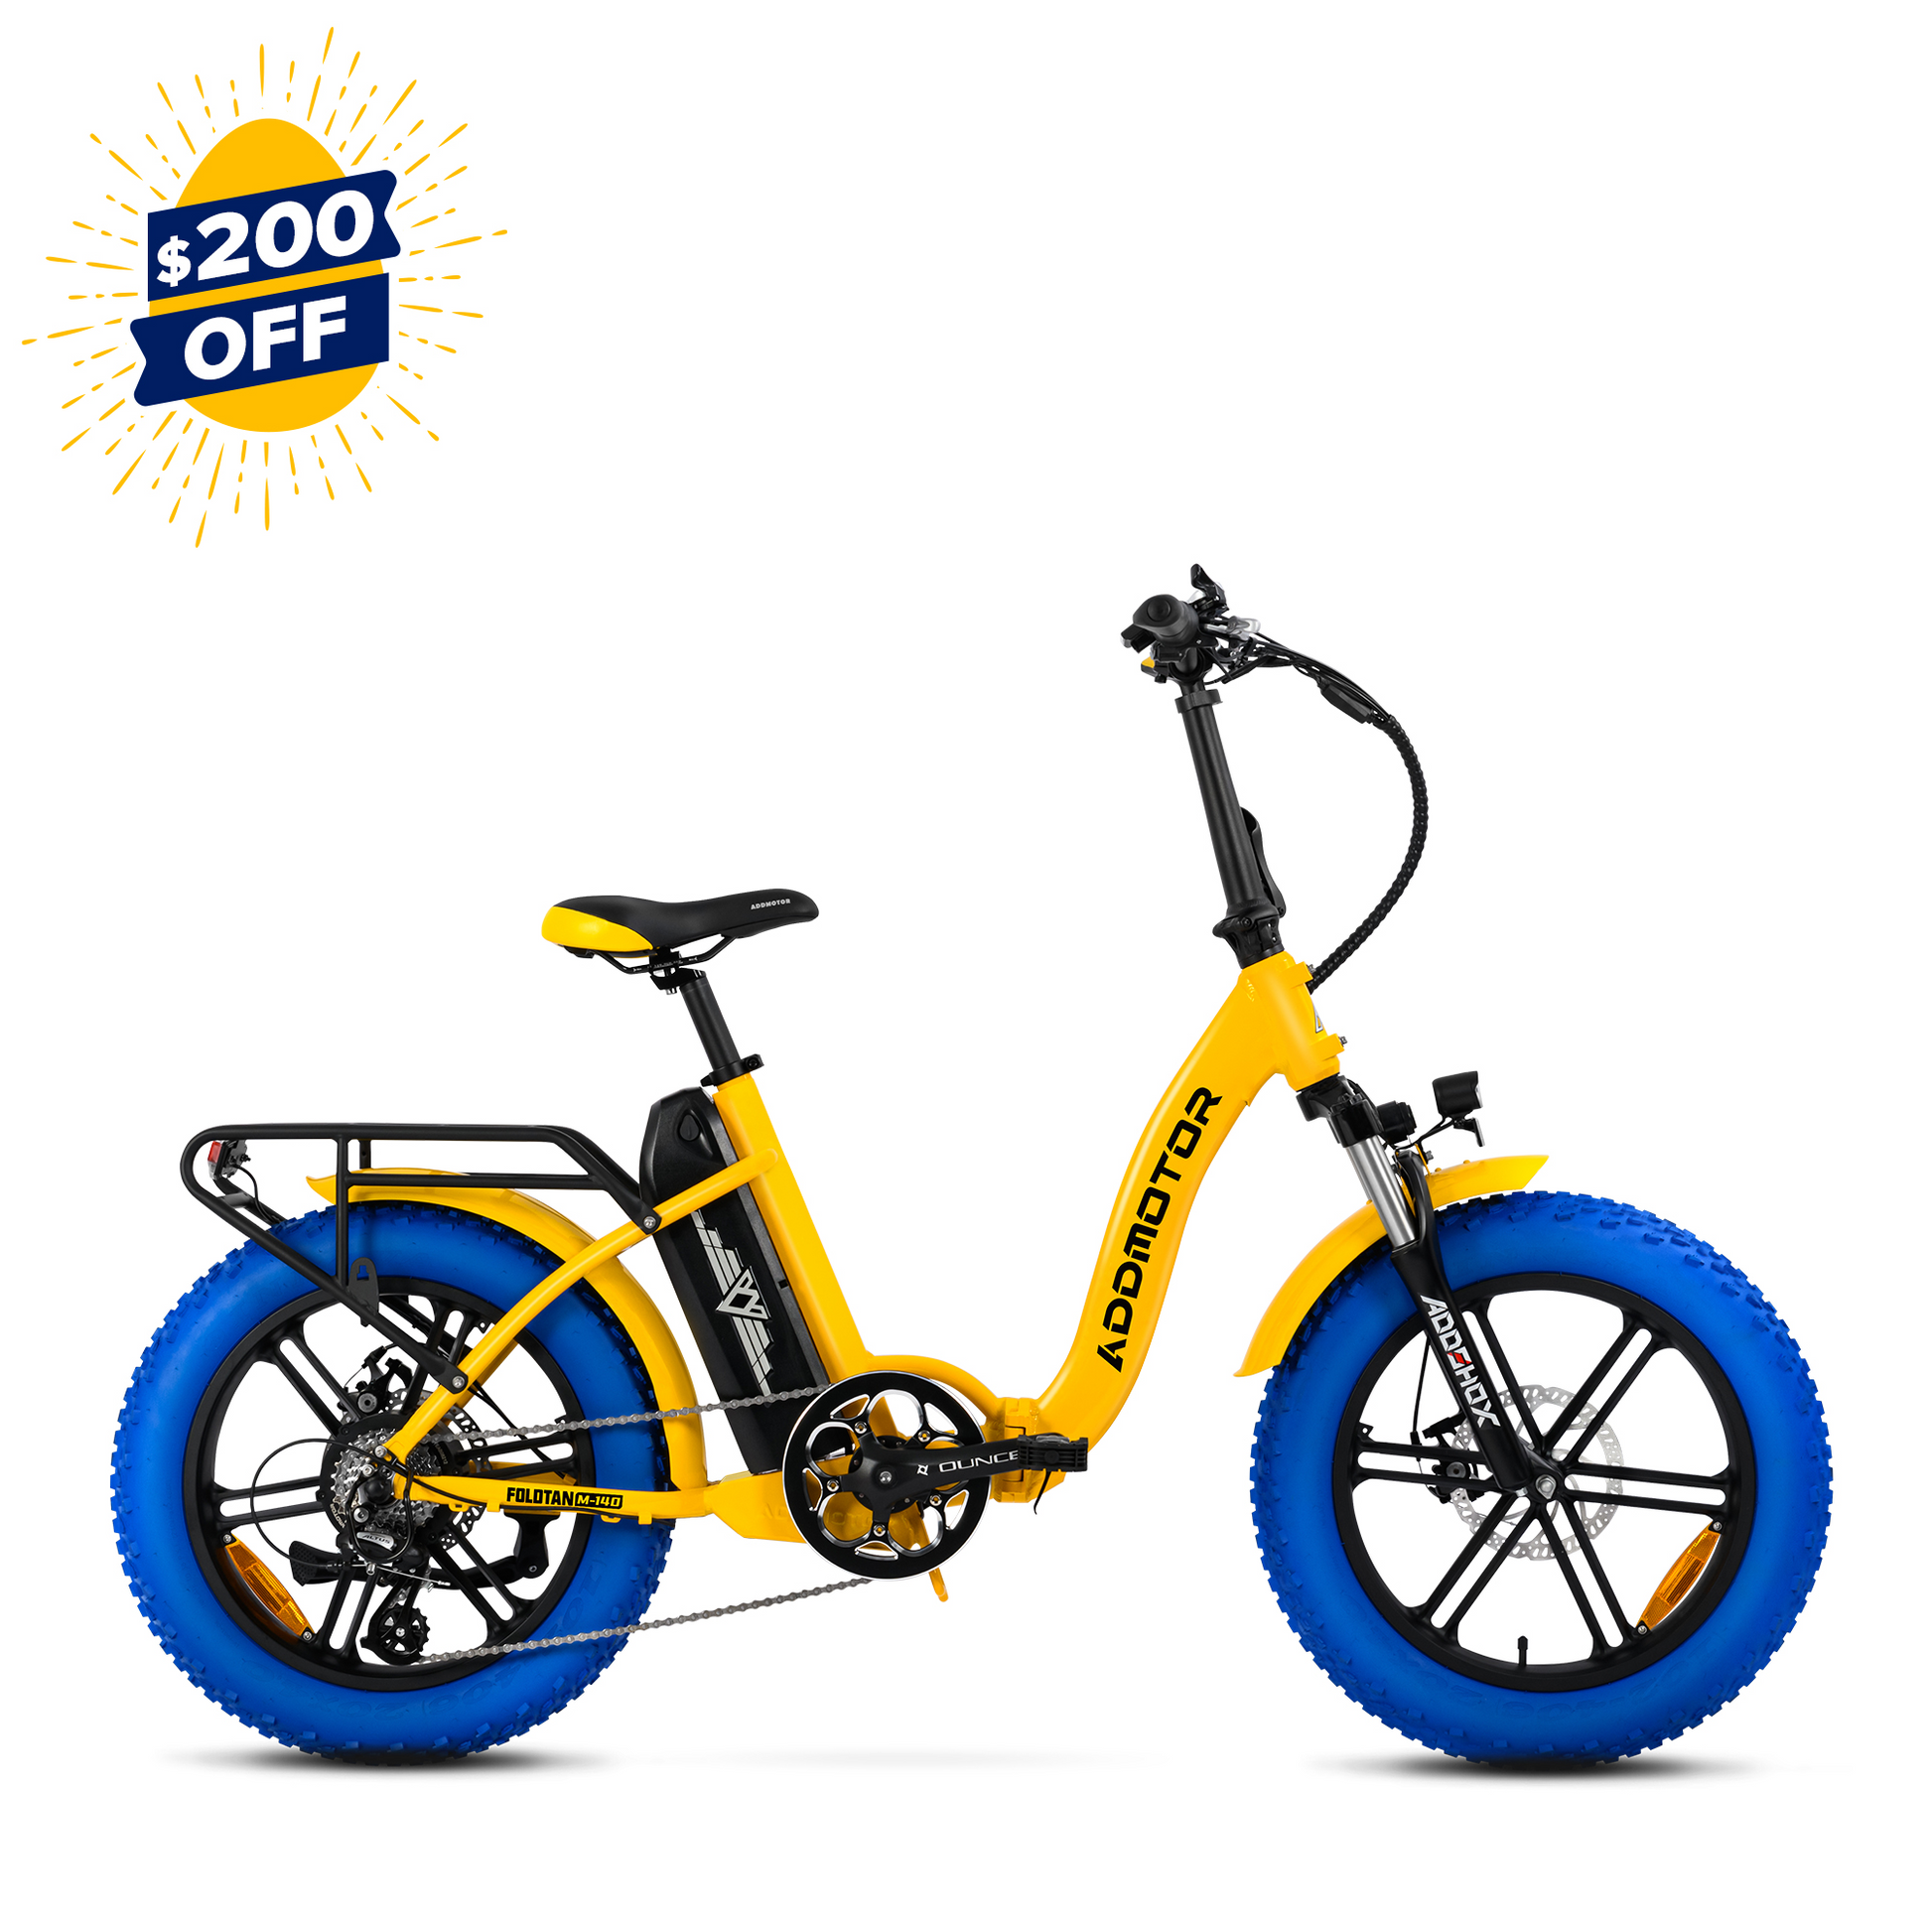 Yellow and black Addmotor - Foldtan M-140 electric bike with thick blue tires on a white background, featuring a $200 off discount badge.